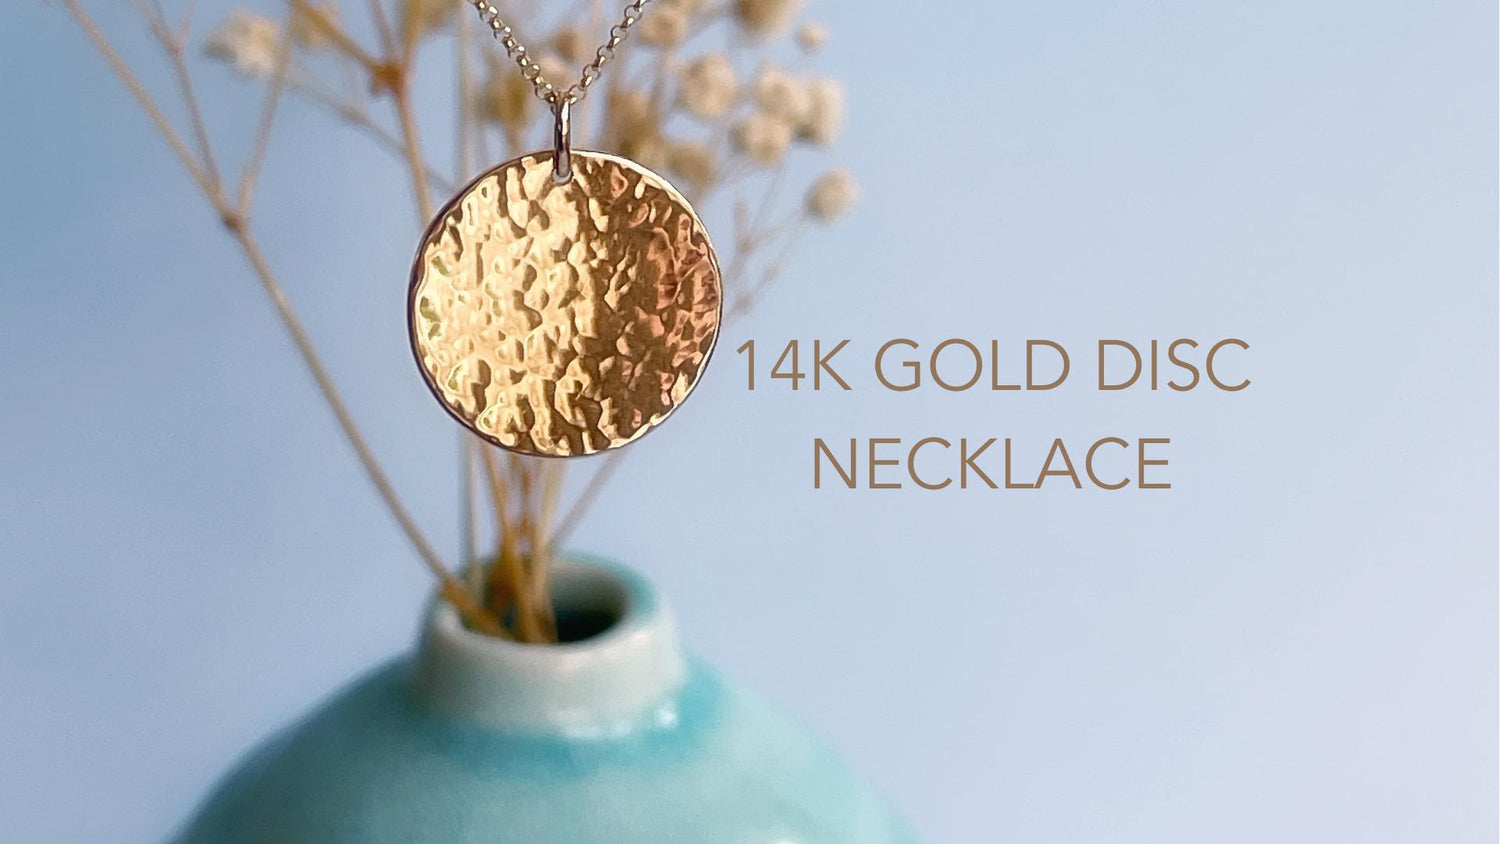 A solid 14k yellow gold hammered disc pendant hanging from a fine gold necklace.